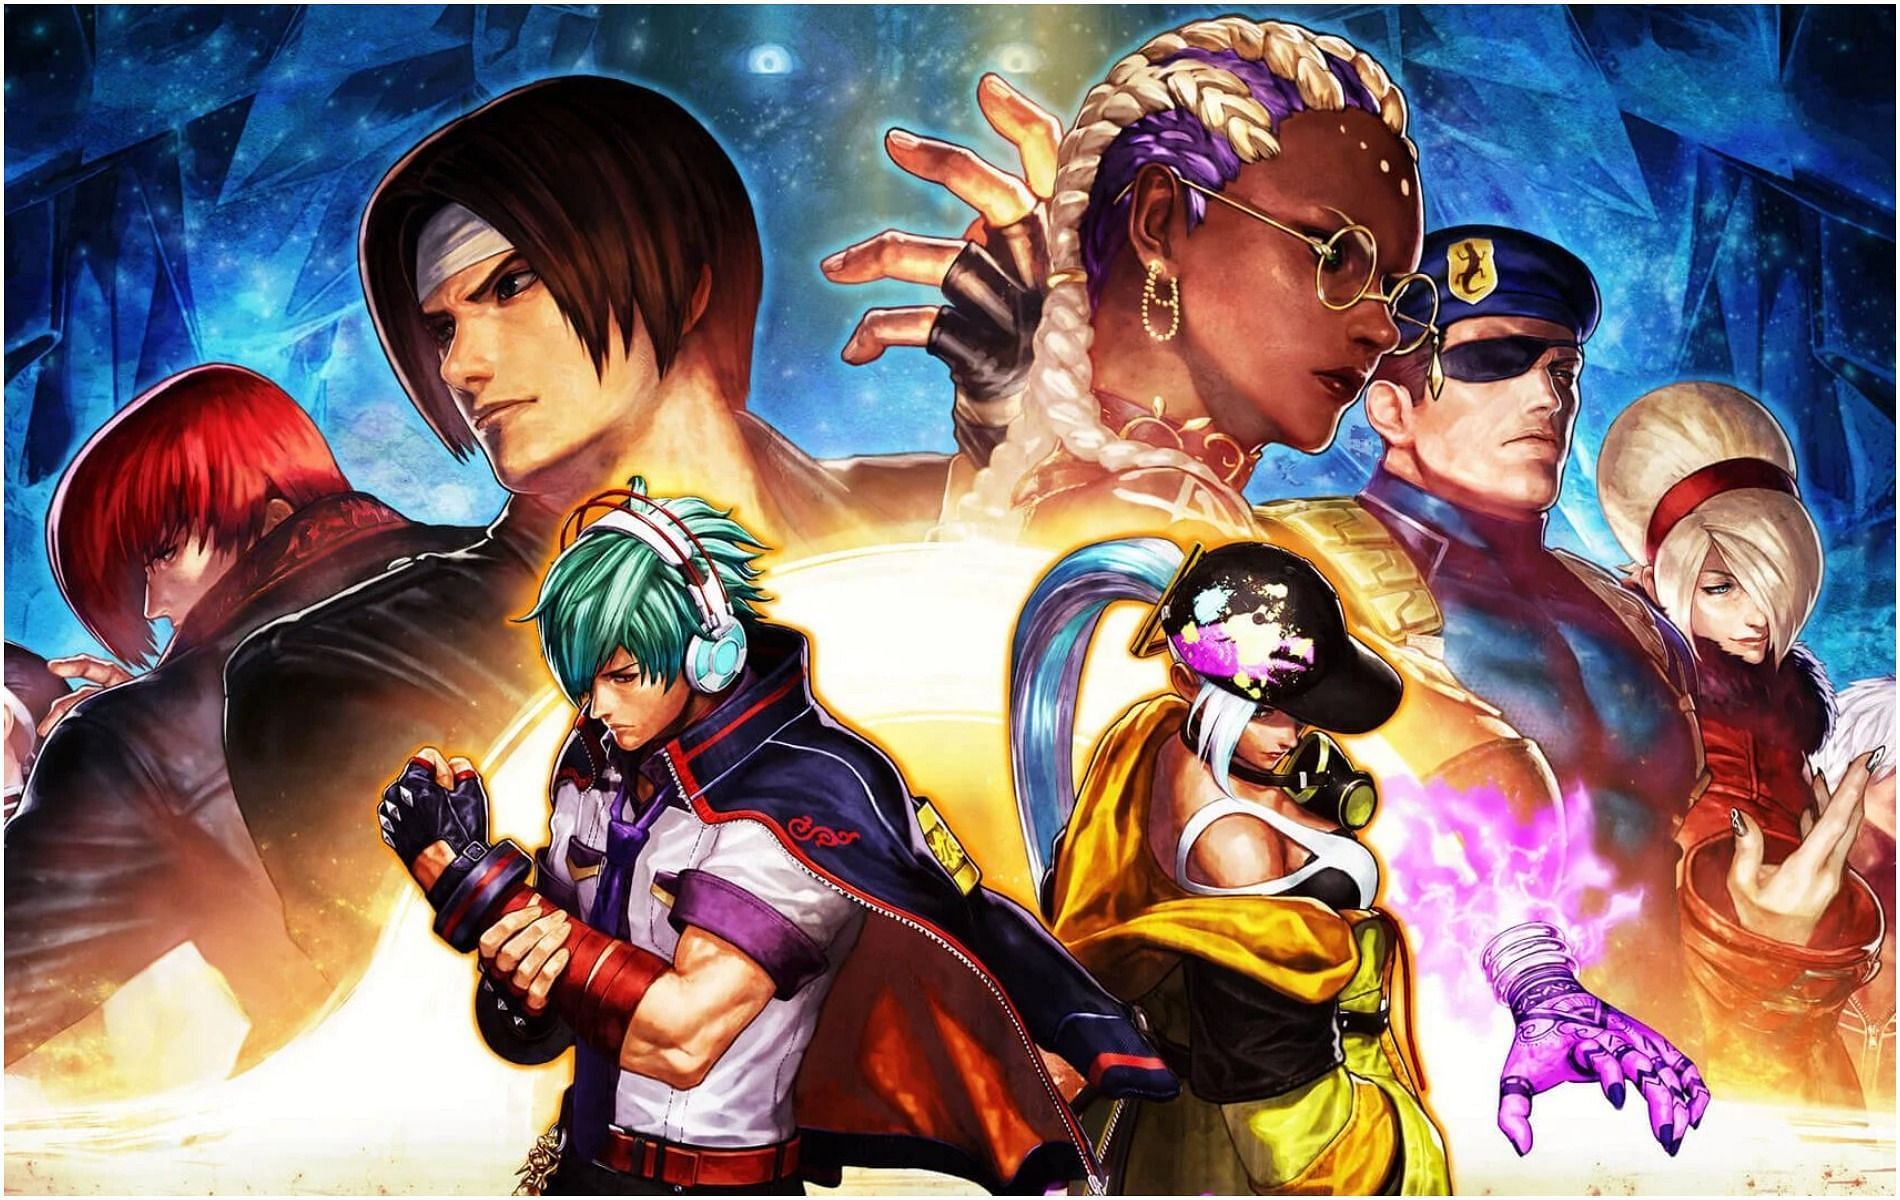 The King of Fighters XV comes with several characters from its universe (Image via SNK)